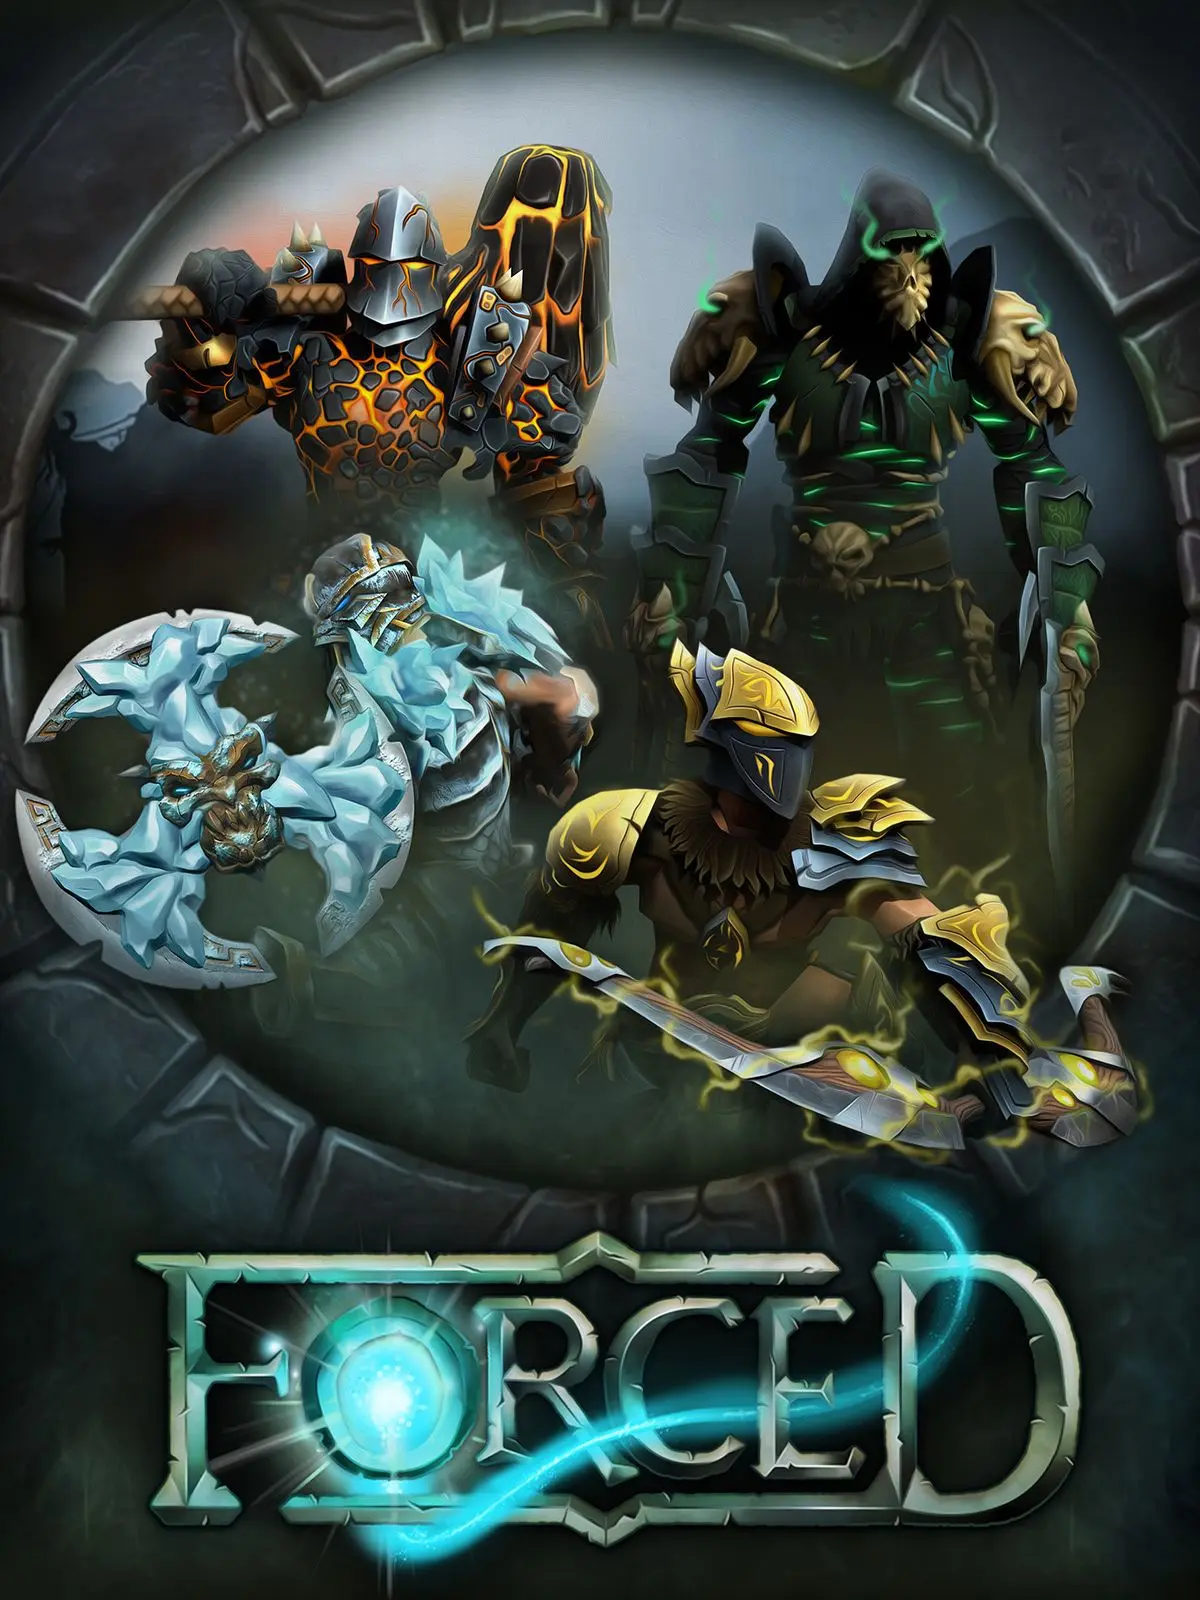 FORCED: Slightly Better Edition (PC / Mac / Linux) - Steam - Digital Code